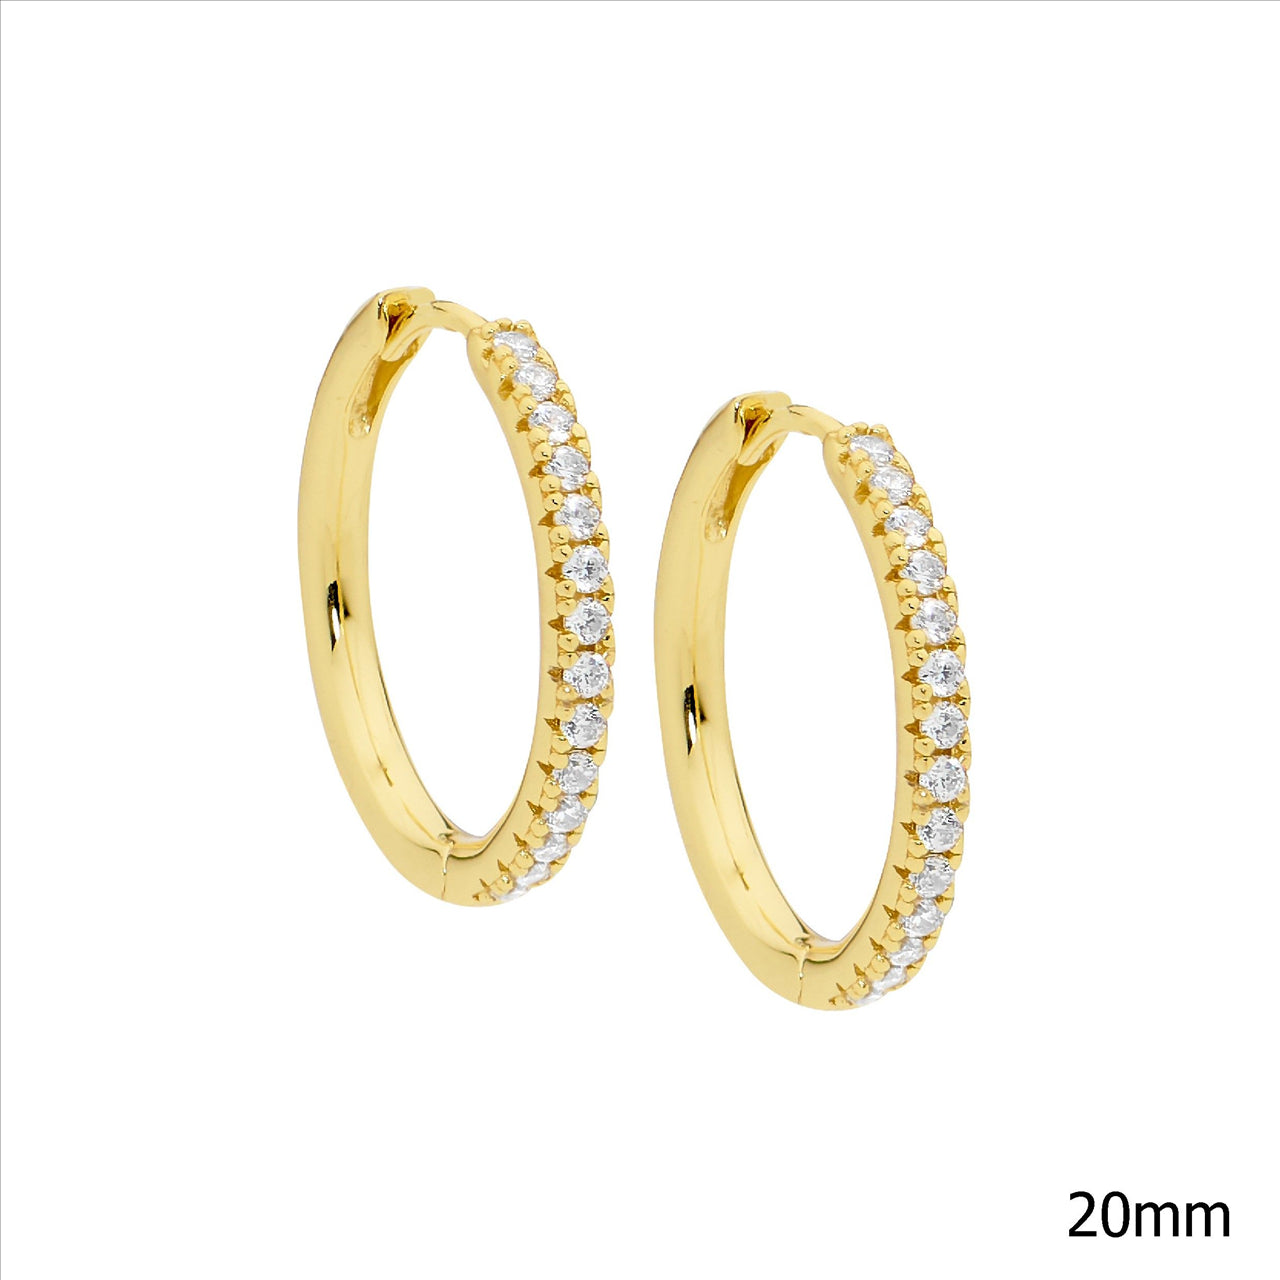 Gold Plate Hoop Earrings with White CZ